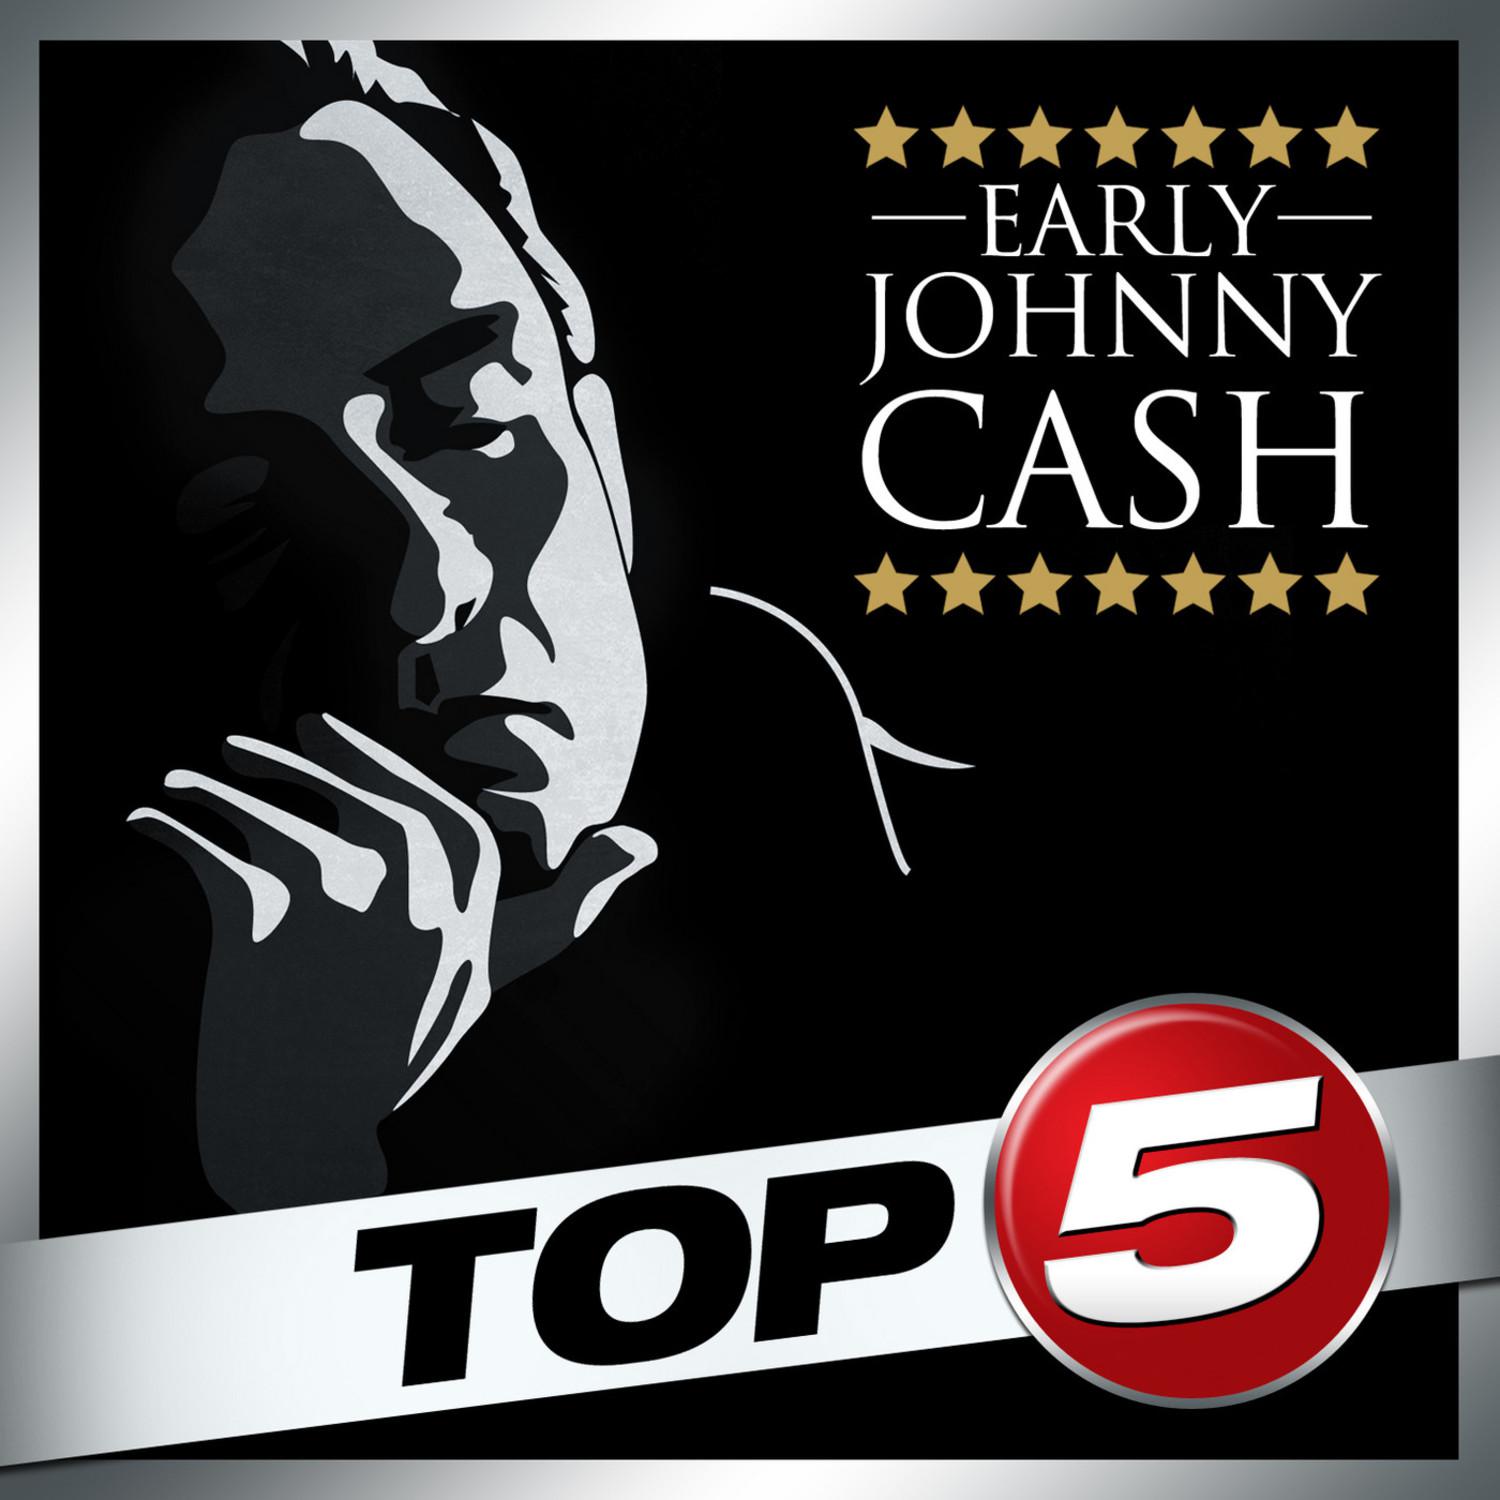 Top 5 - Early Johnny Cash - EP